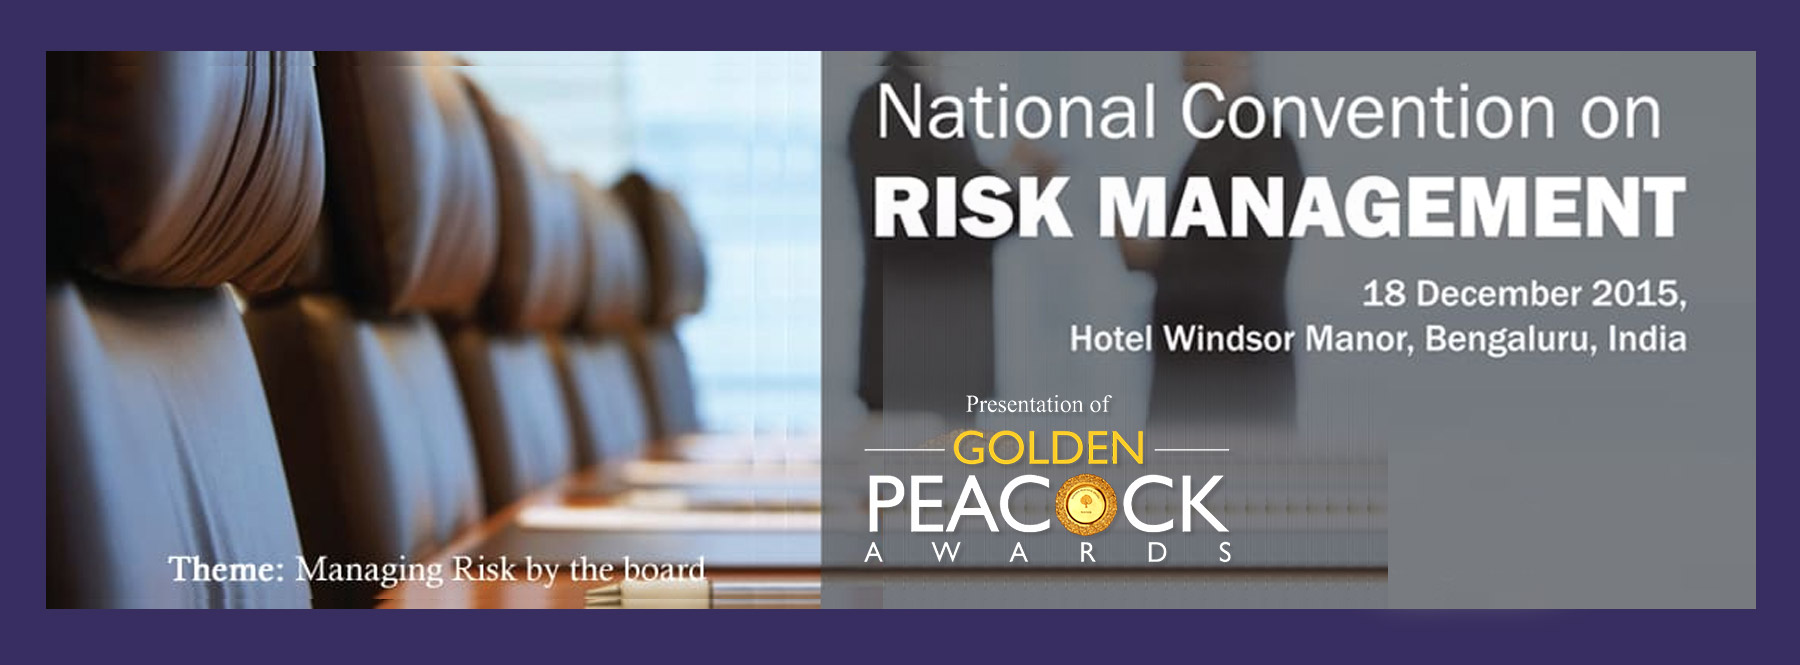 National Convention on Risk Management 2015